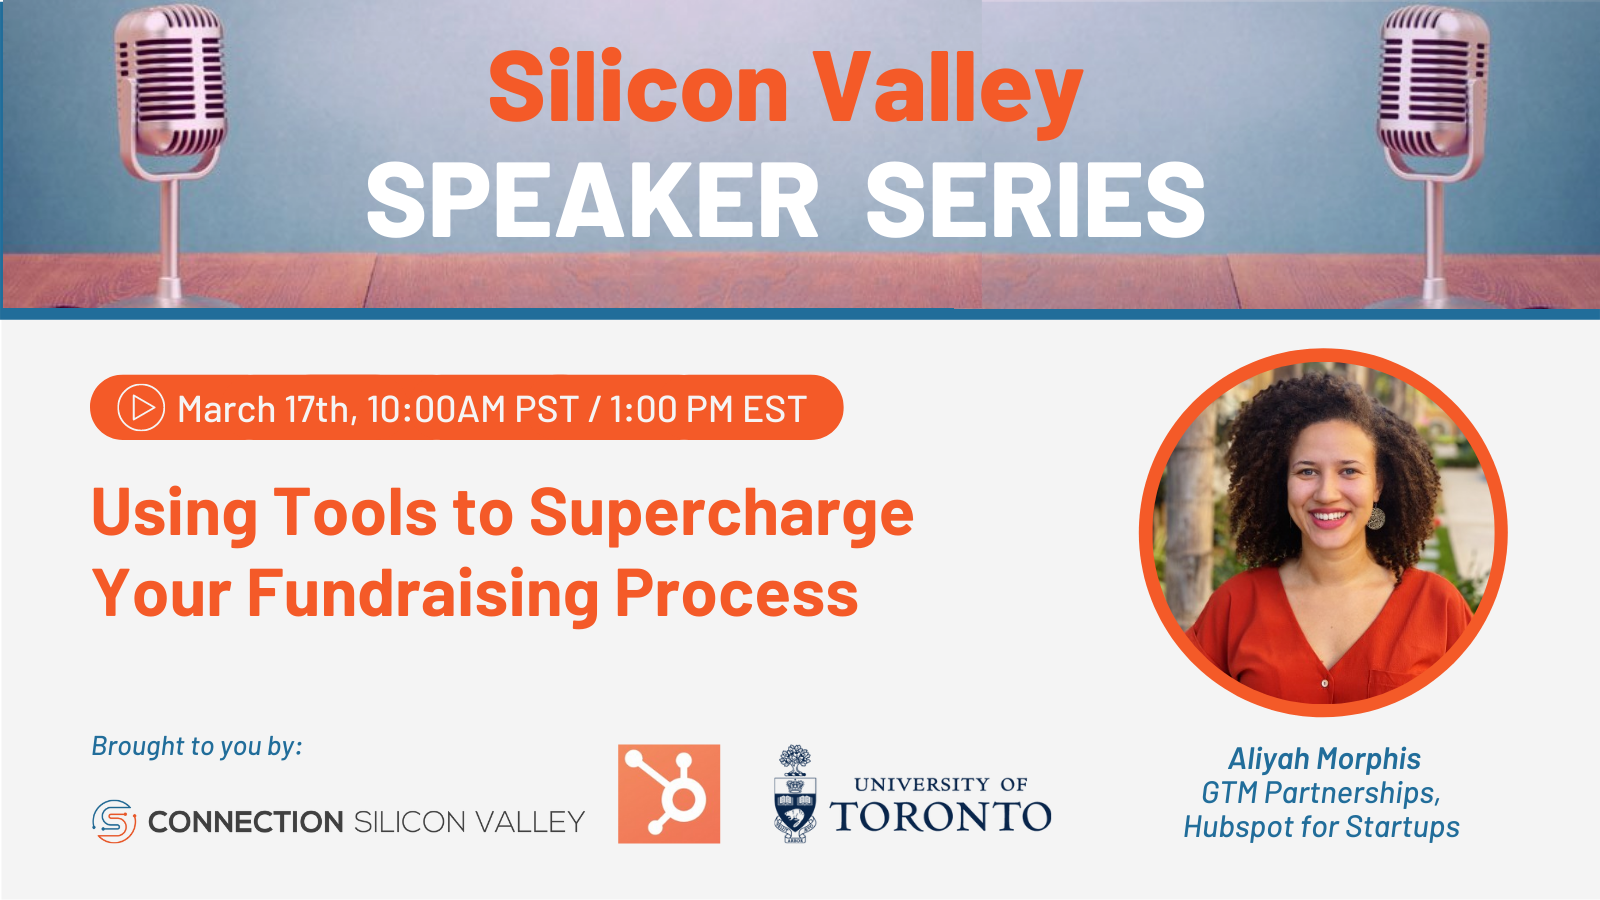 Using Tools to Supercharge Your Fundraising Process